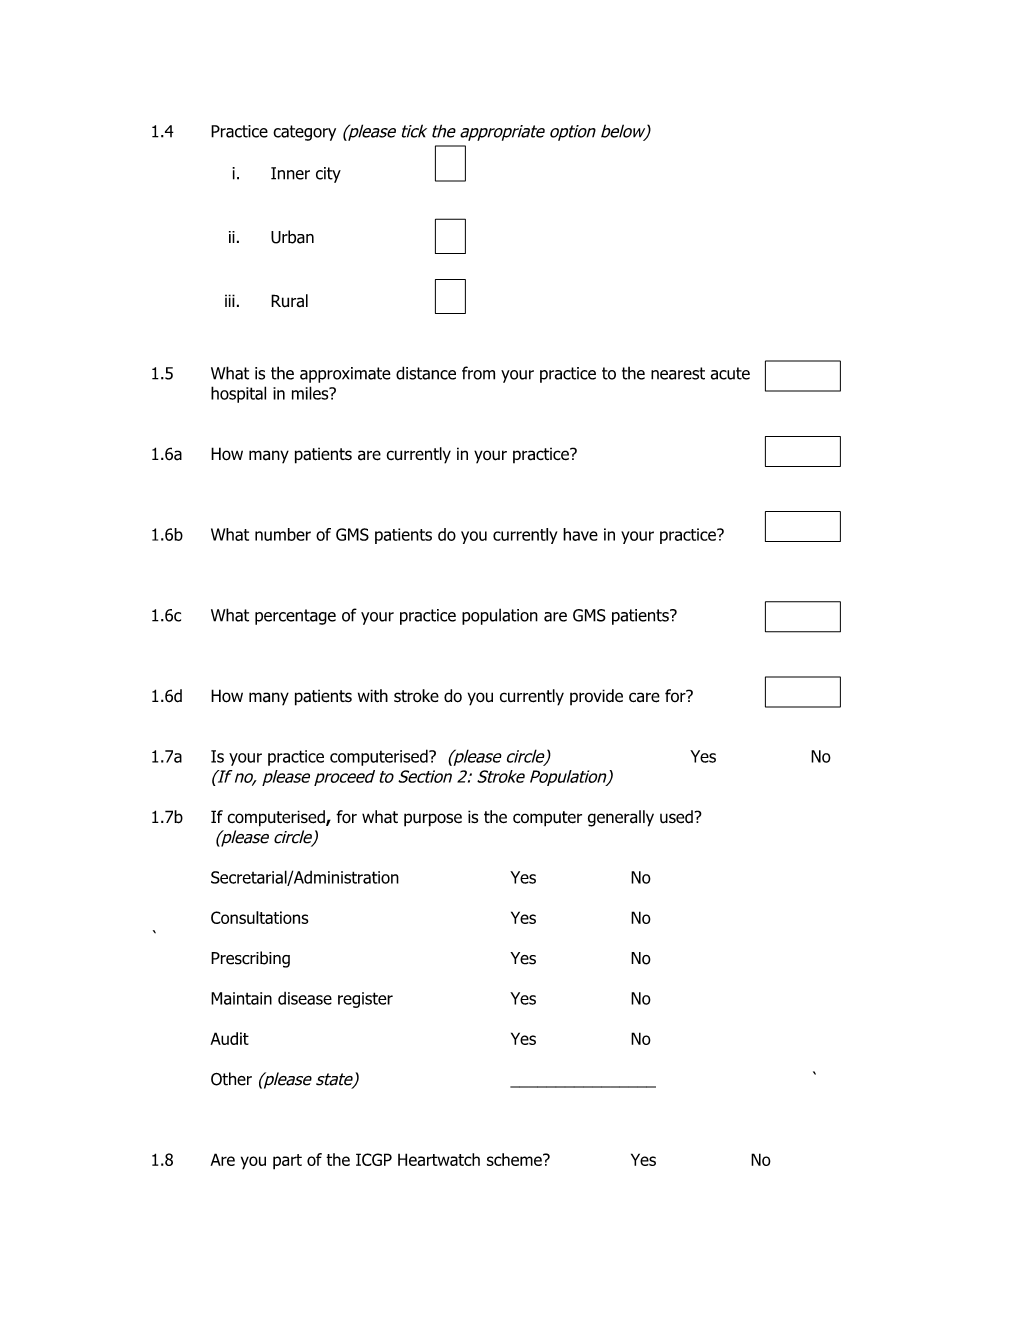 Draft Questionnaire Further Revision Will Follow Discussion with Gps and Piloting